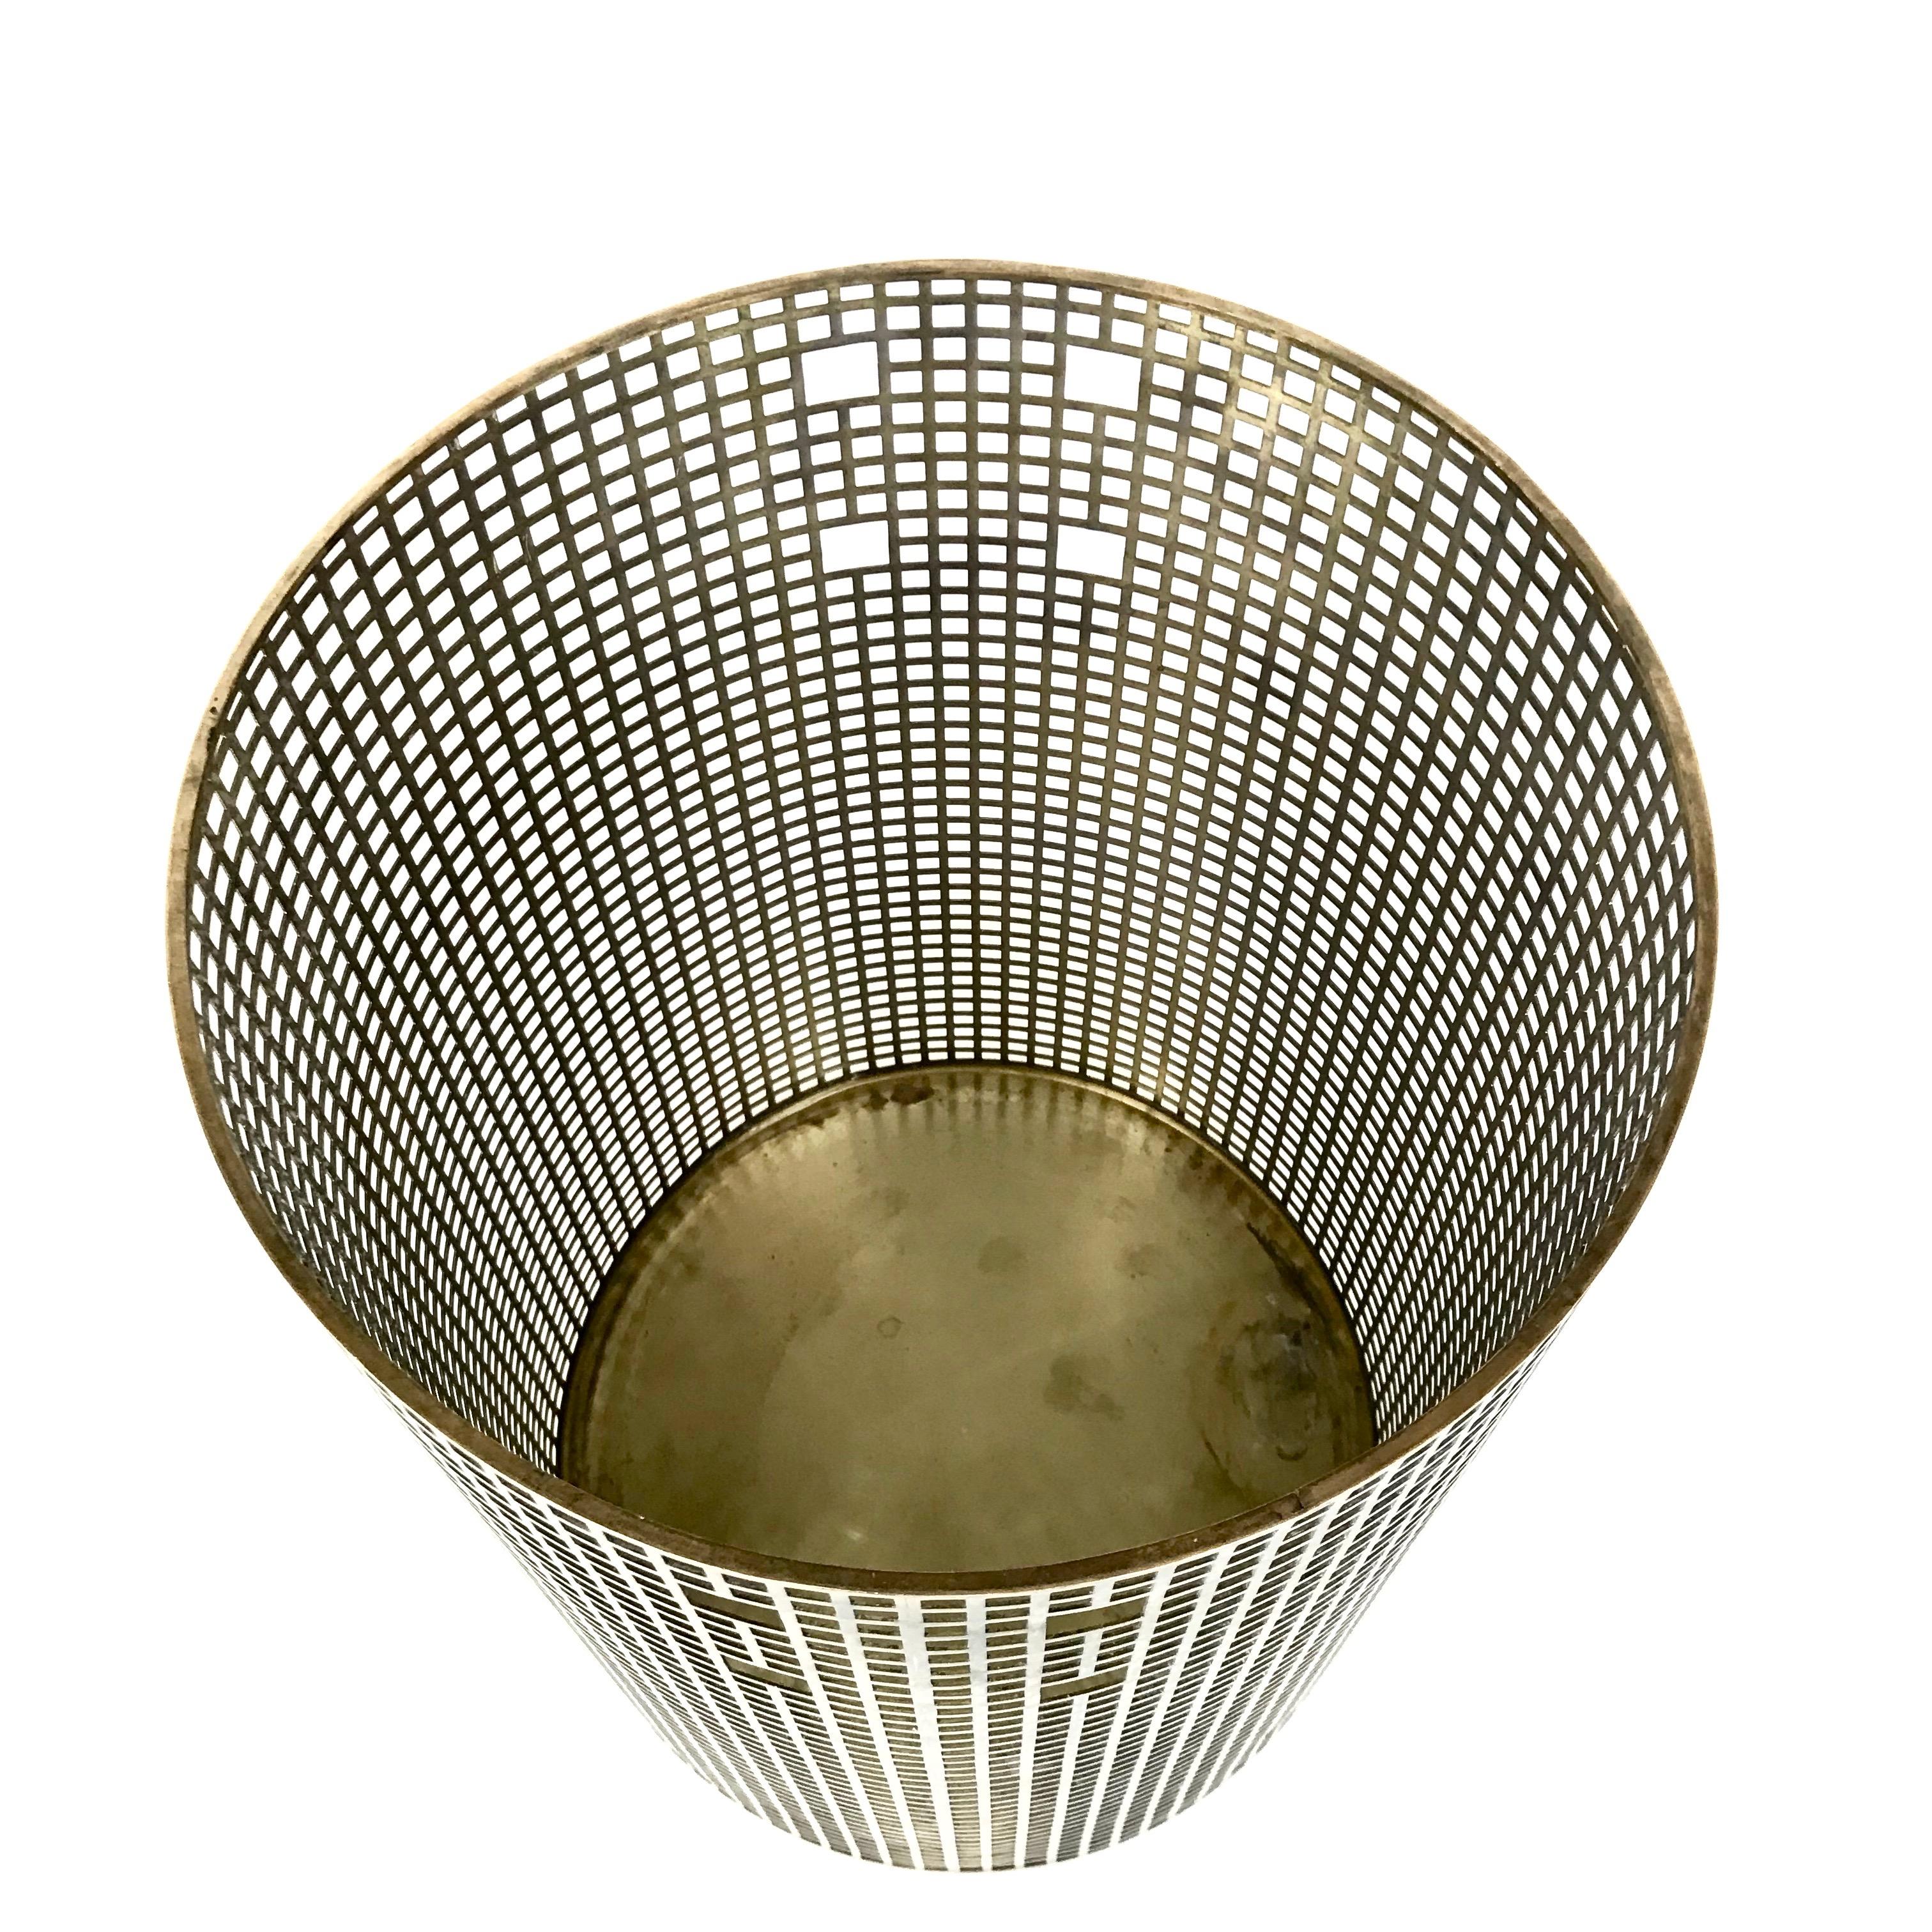 Lacquered Josef Hoffmann Design Perforated Brass Umbrella Stand or Basket, 1950s, Austria